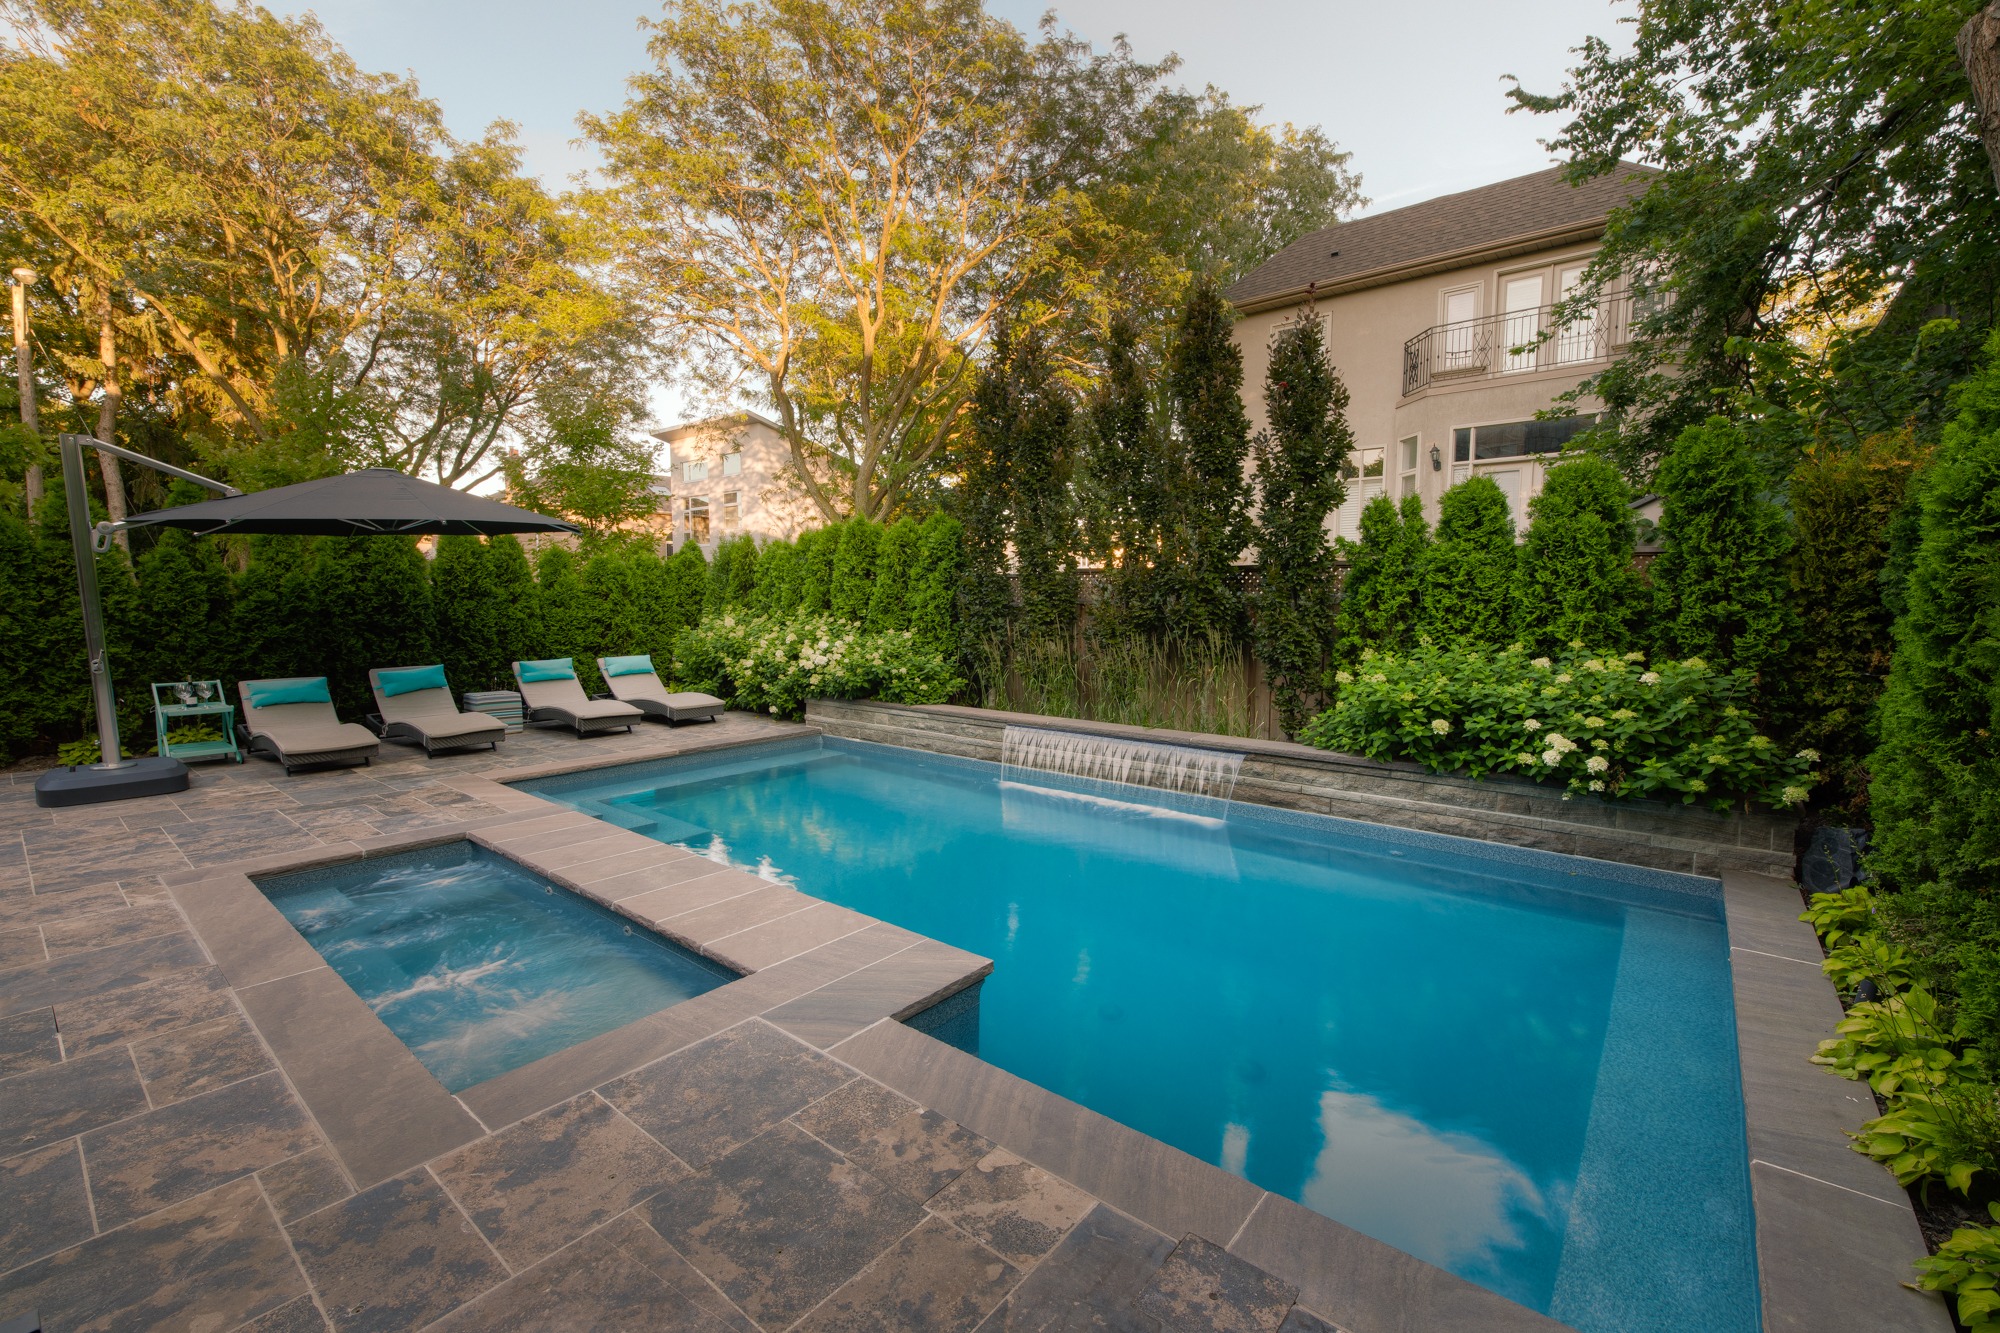 This image shows a luxury backyard with an in-ground swimming pool and jacuzzi, sun loungers under an umbrella, surrounded by a manicured garden and trees.